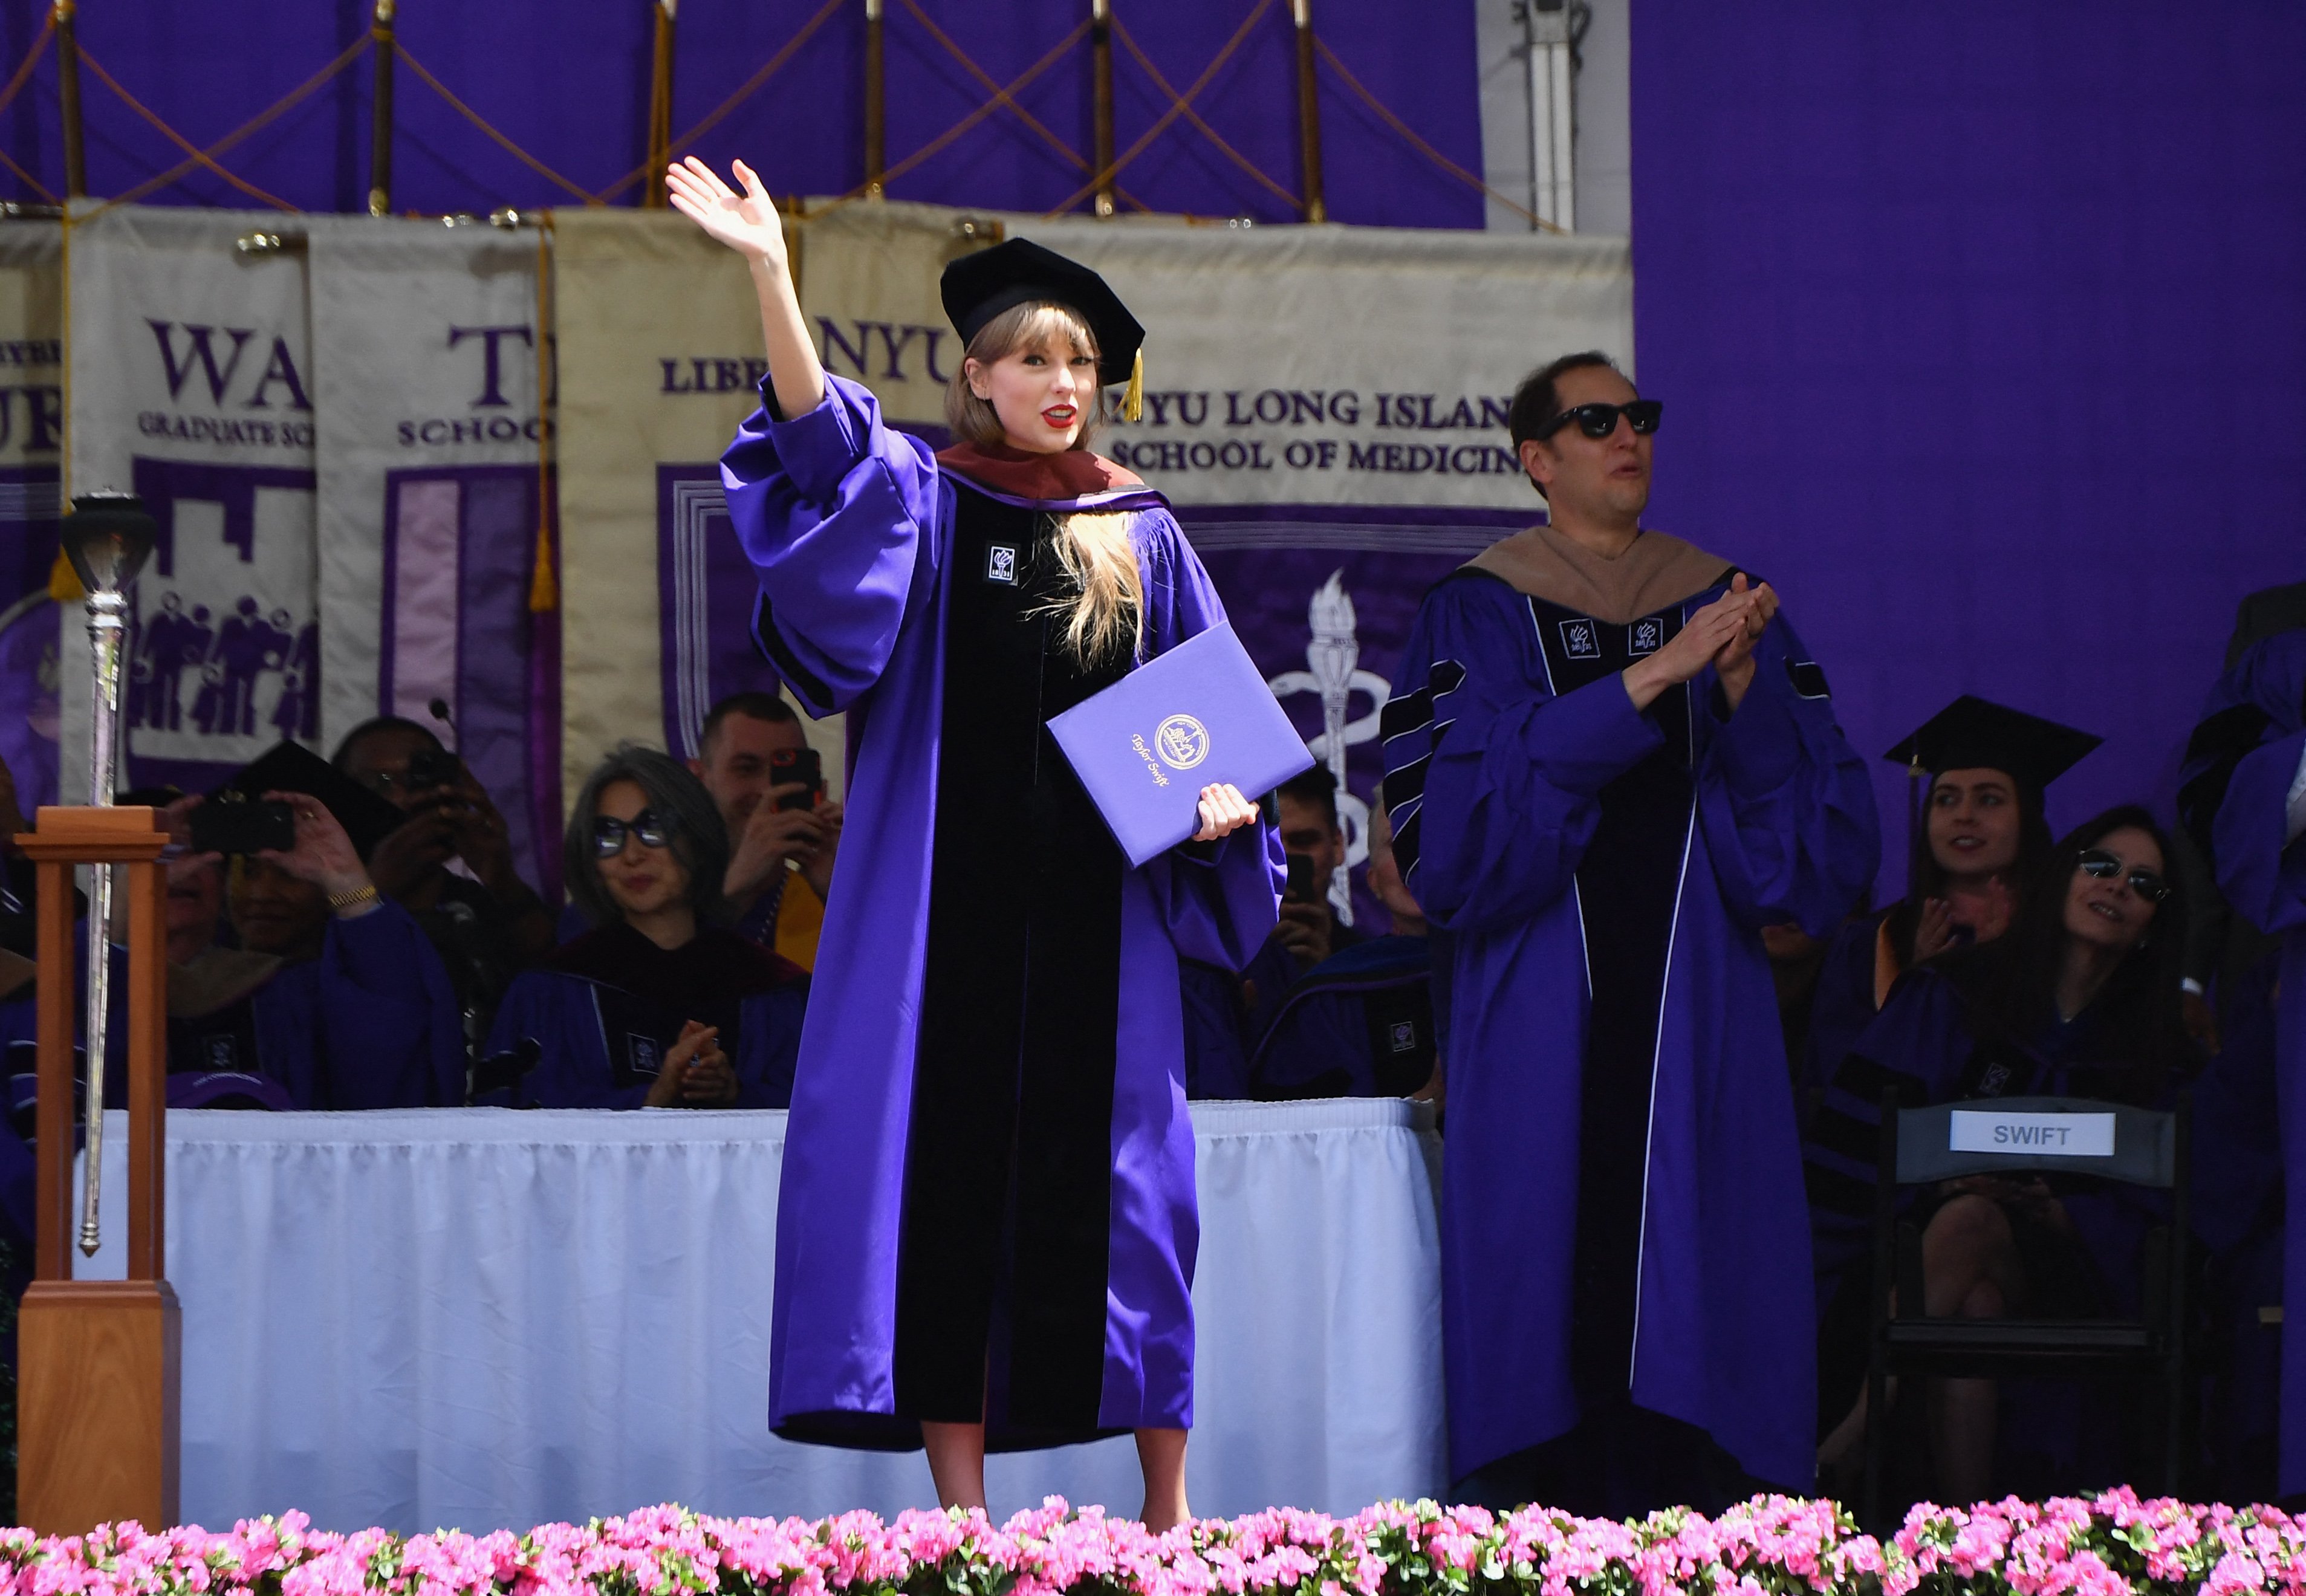 Taylor Swift receives an honorary doctorate of fine arts during New York University's commencement rites for the class of 2022 at Yankee Stadium in New York City on May 18, 2022. | Source: Getty Images